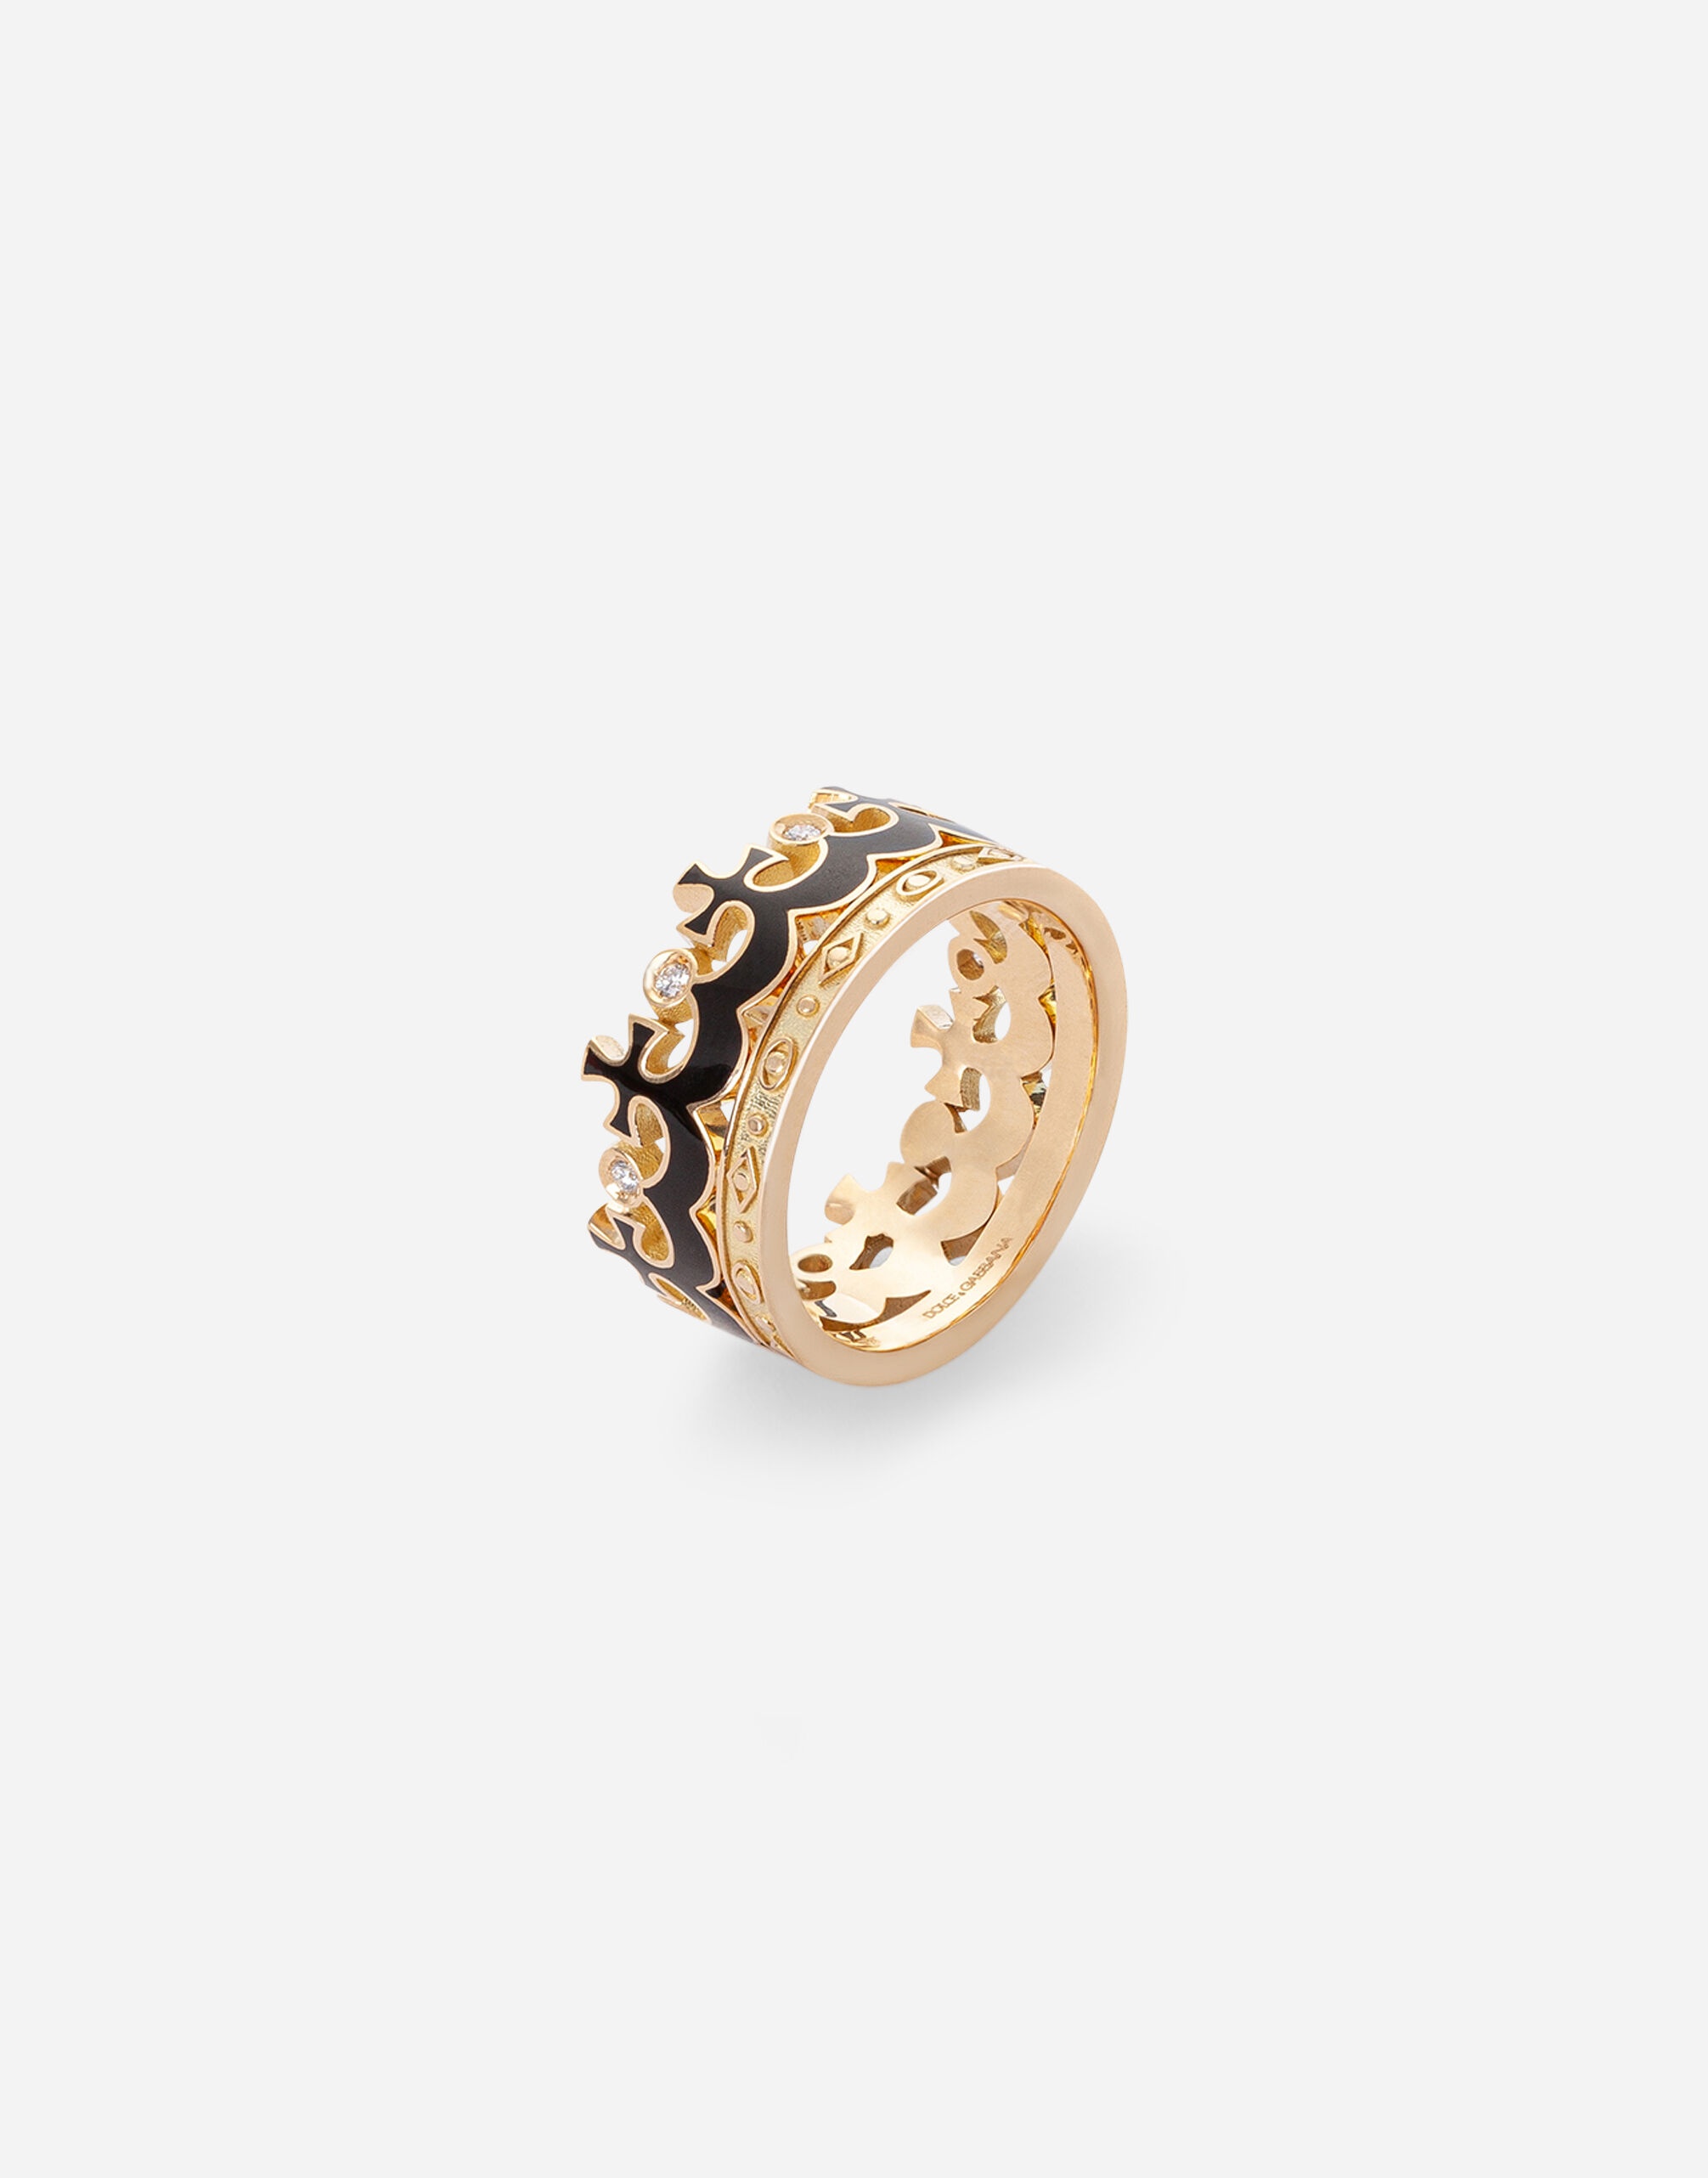 Crown yellow gold ring with black enamel crown and diamonds - 2